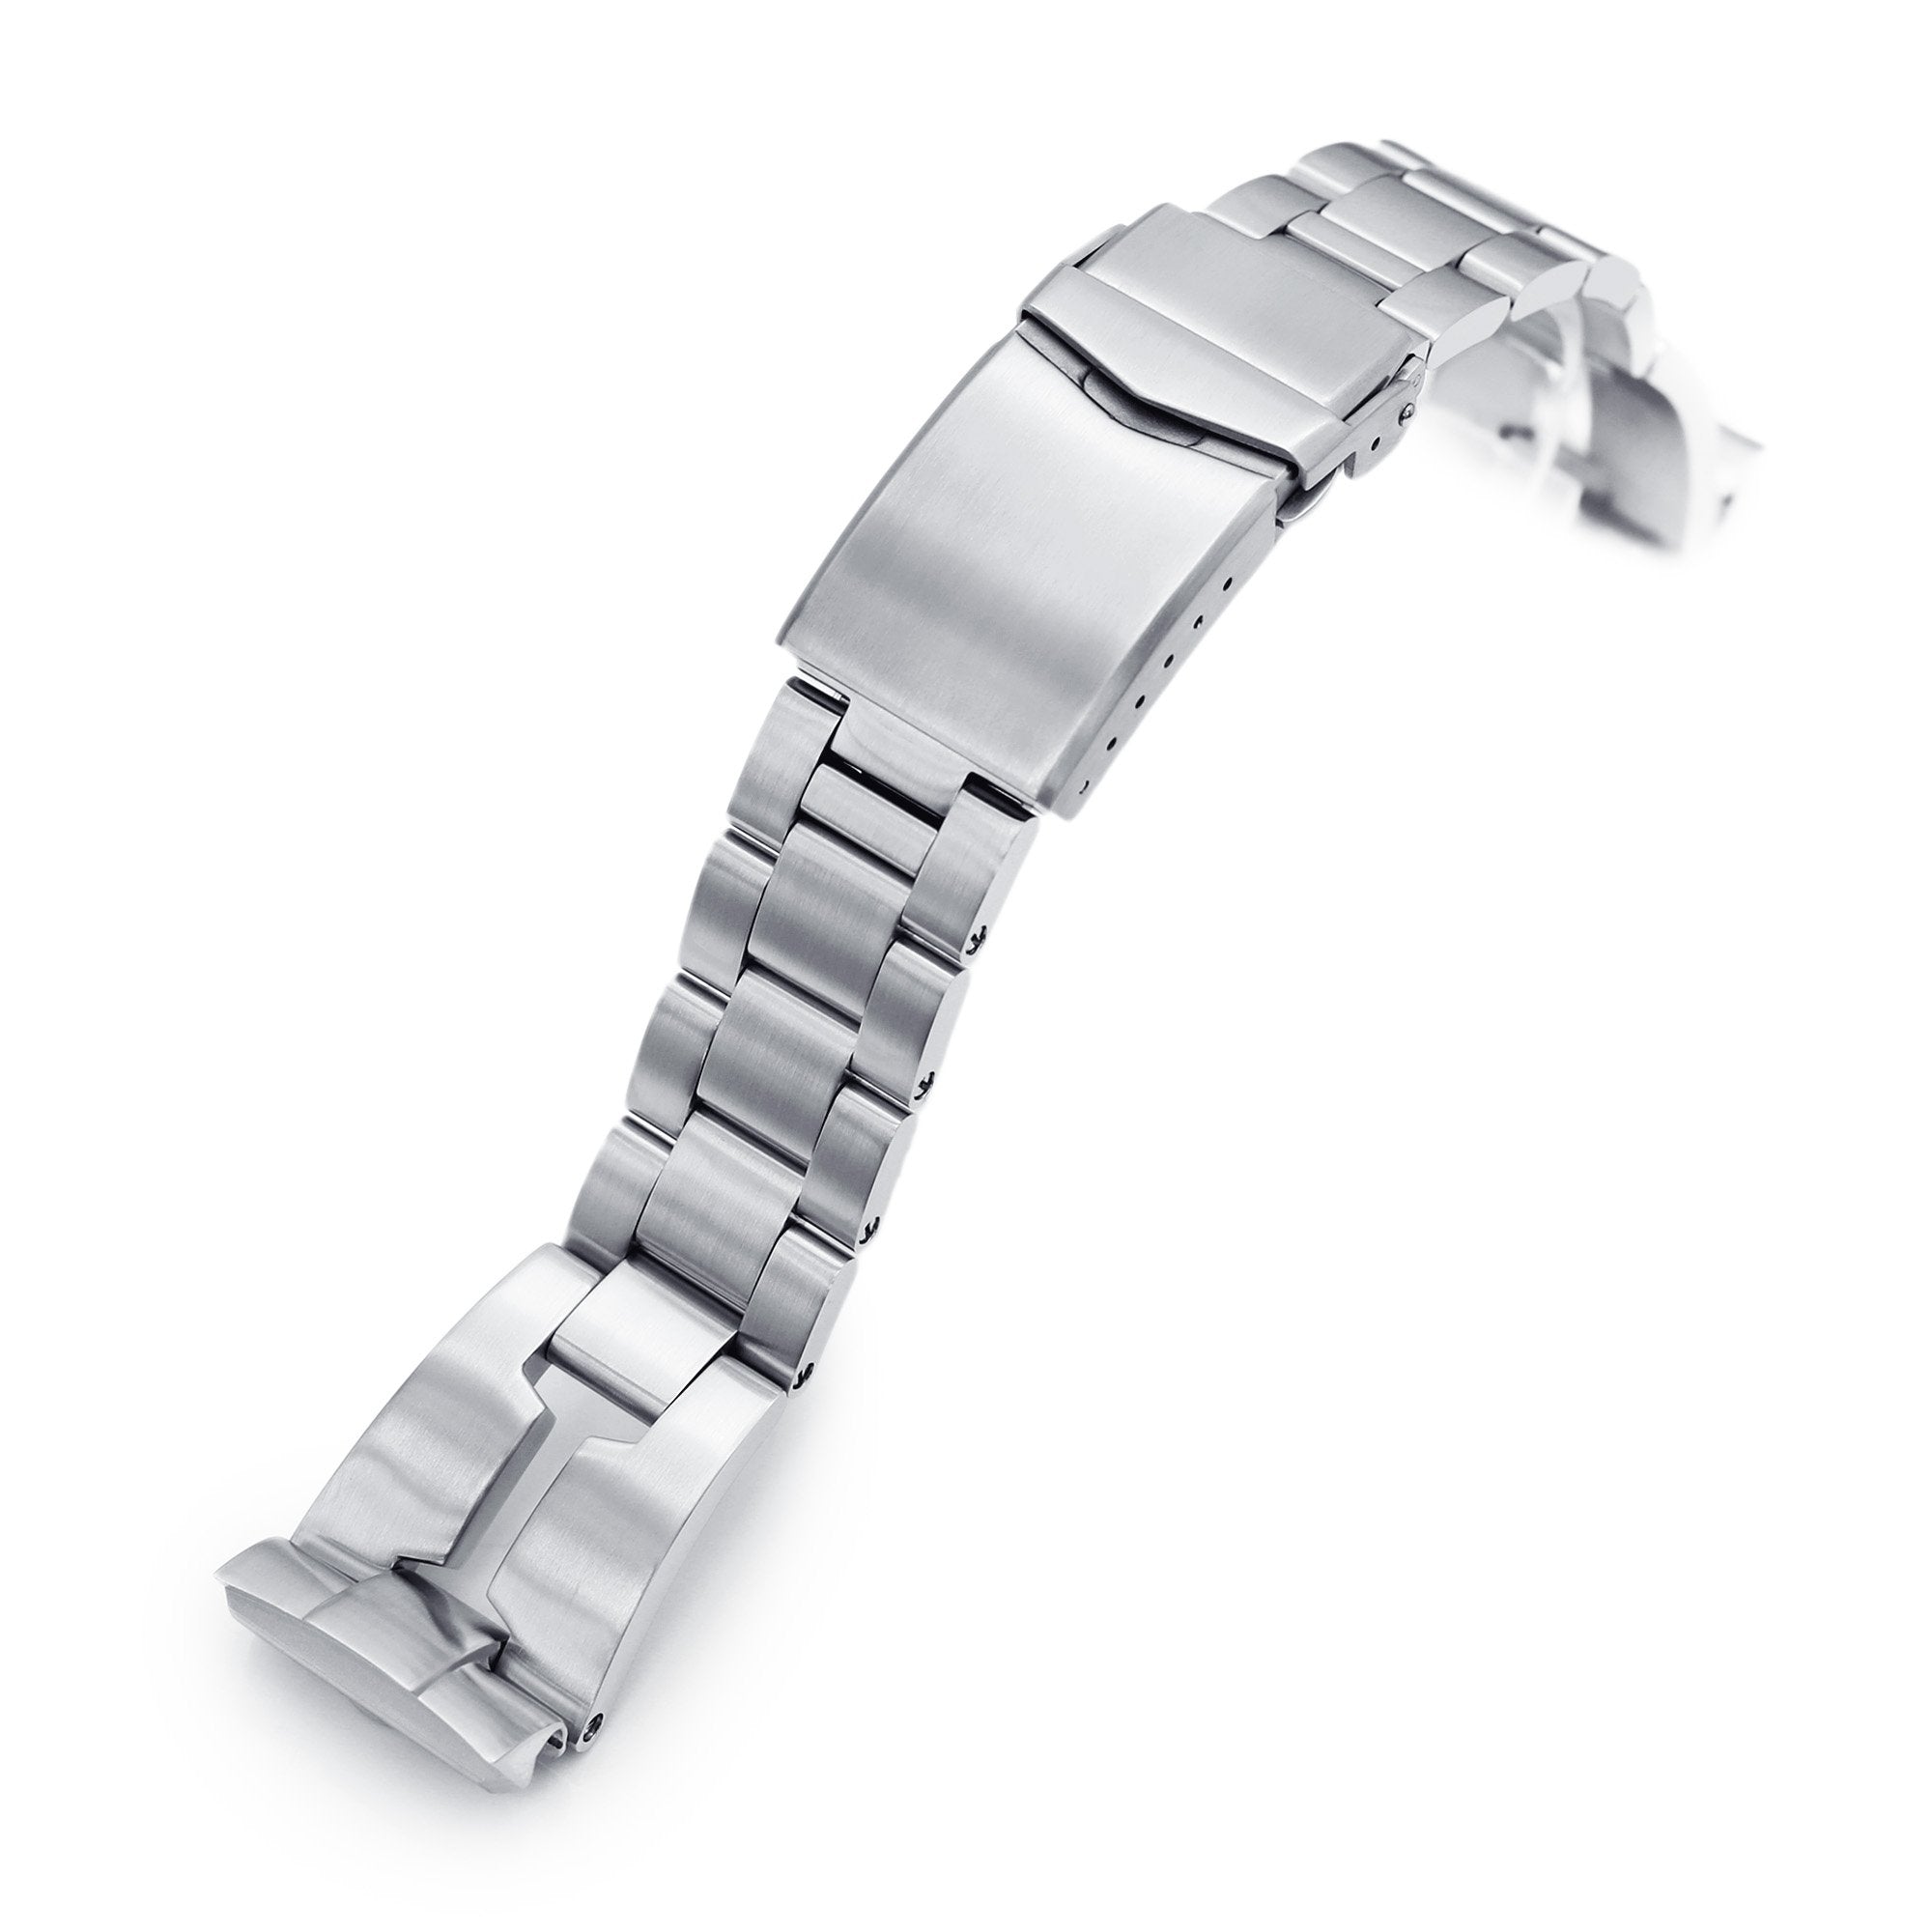 22mm Retro Razor 316L Stainless Steel Watch Bracelet for Seiko new Turtles SRP777 Brushed V-Clasp Strapcode Watch Bands